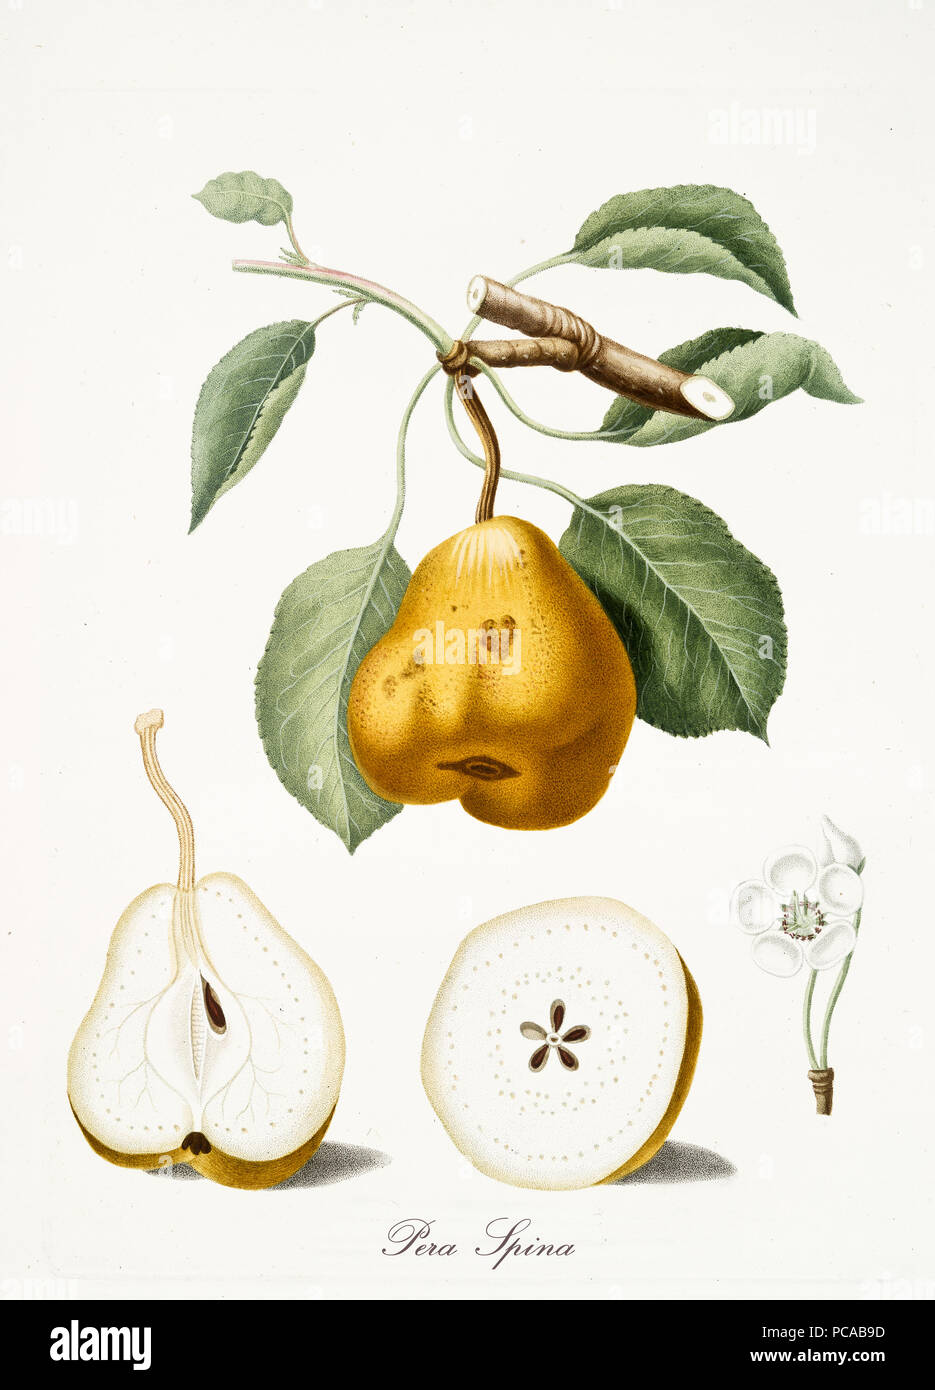 Isolated Pear, pear tree leaves, pear flower and two fruit sections on white background. Old botanical watercolor detailed illustration By Giorgio Gallesio publ. 1817, 1839 Pisa Italy. Stock Photo